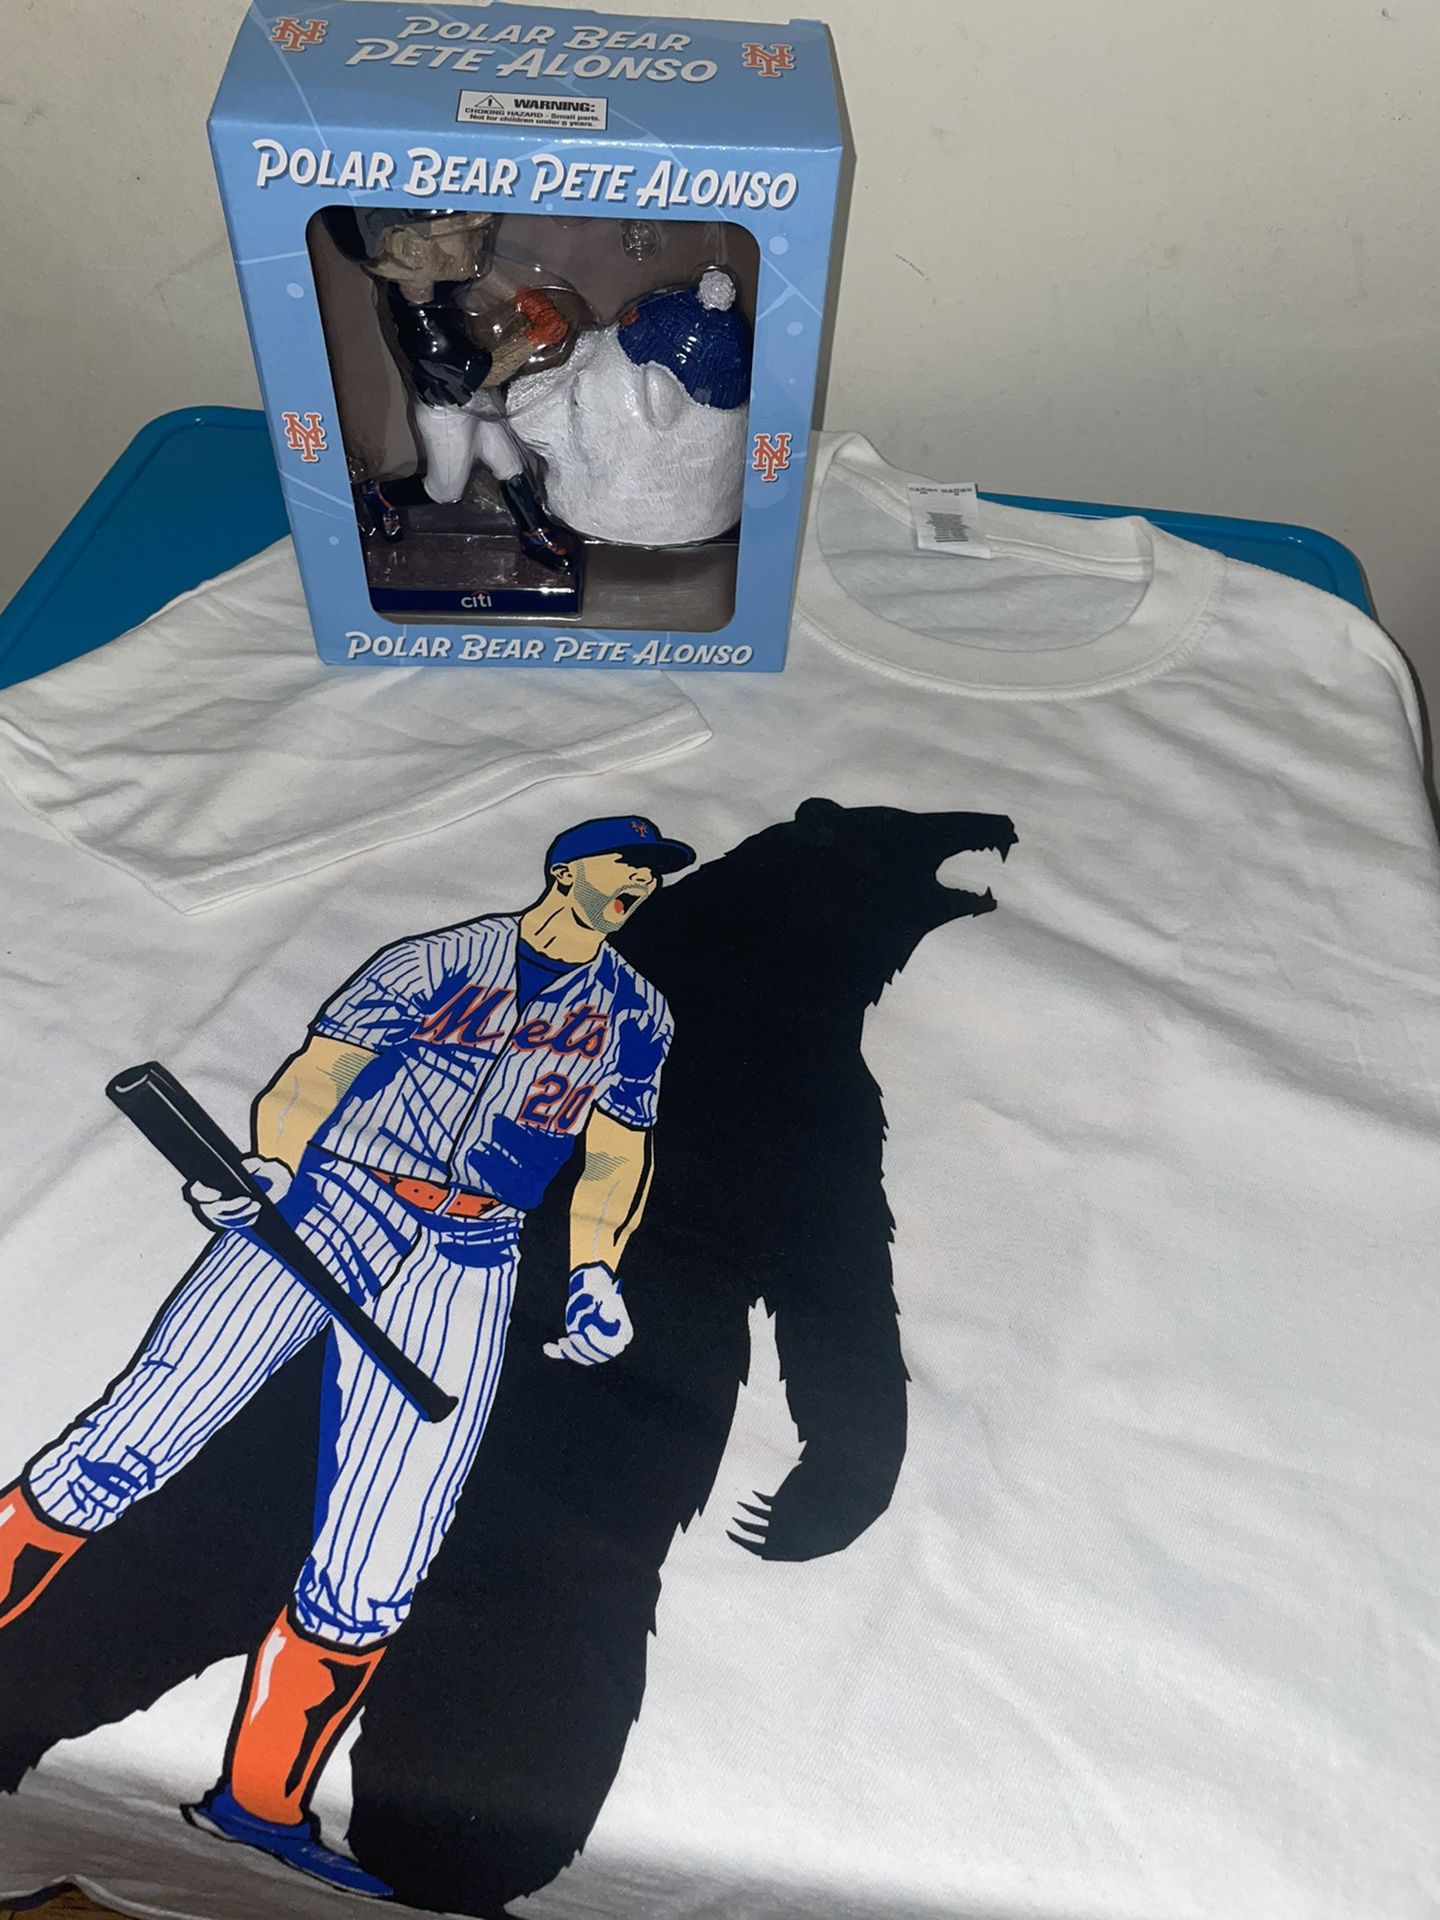 Pete Alonso Bobblehead & Polar bear Tshirt for Sale in Queens, NY - OfferUp